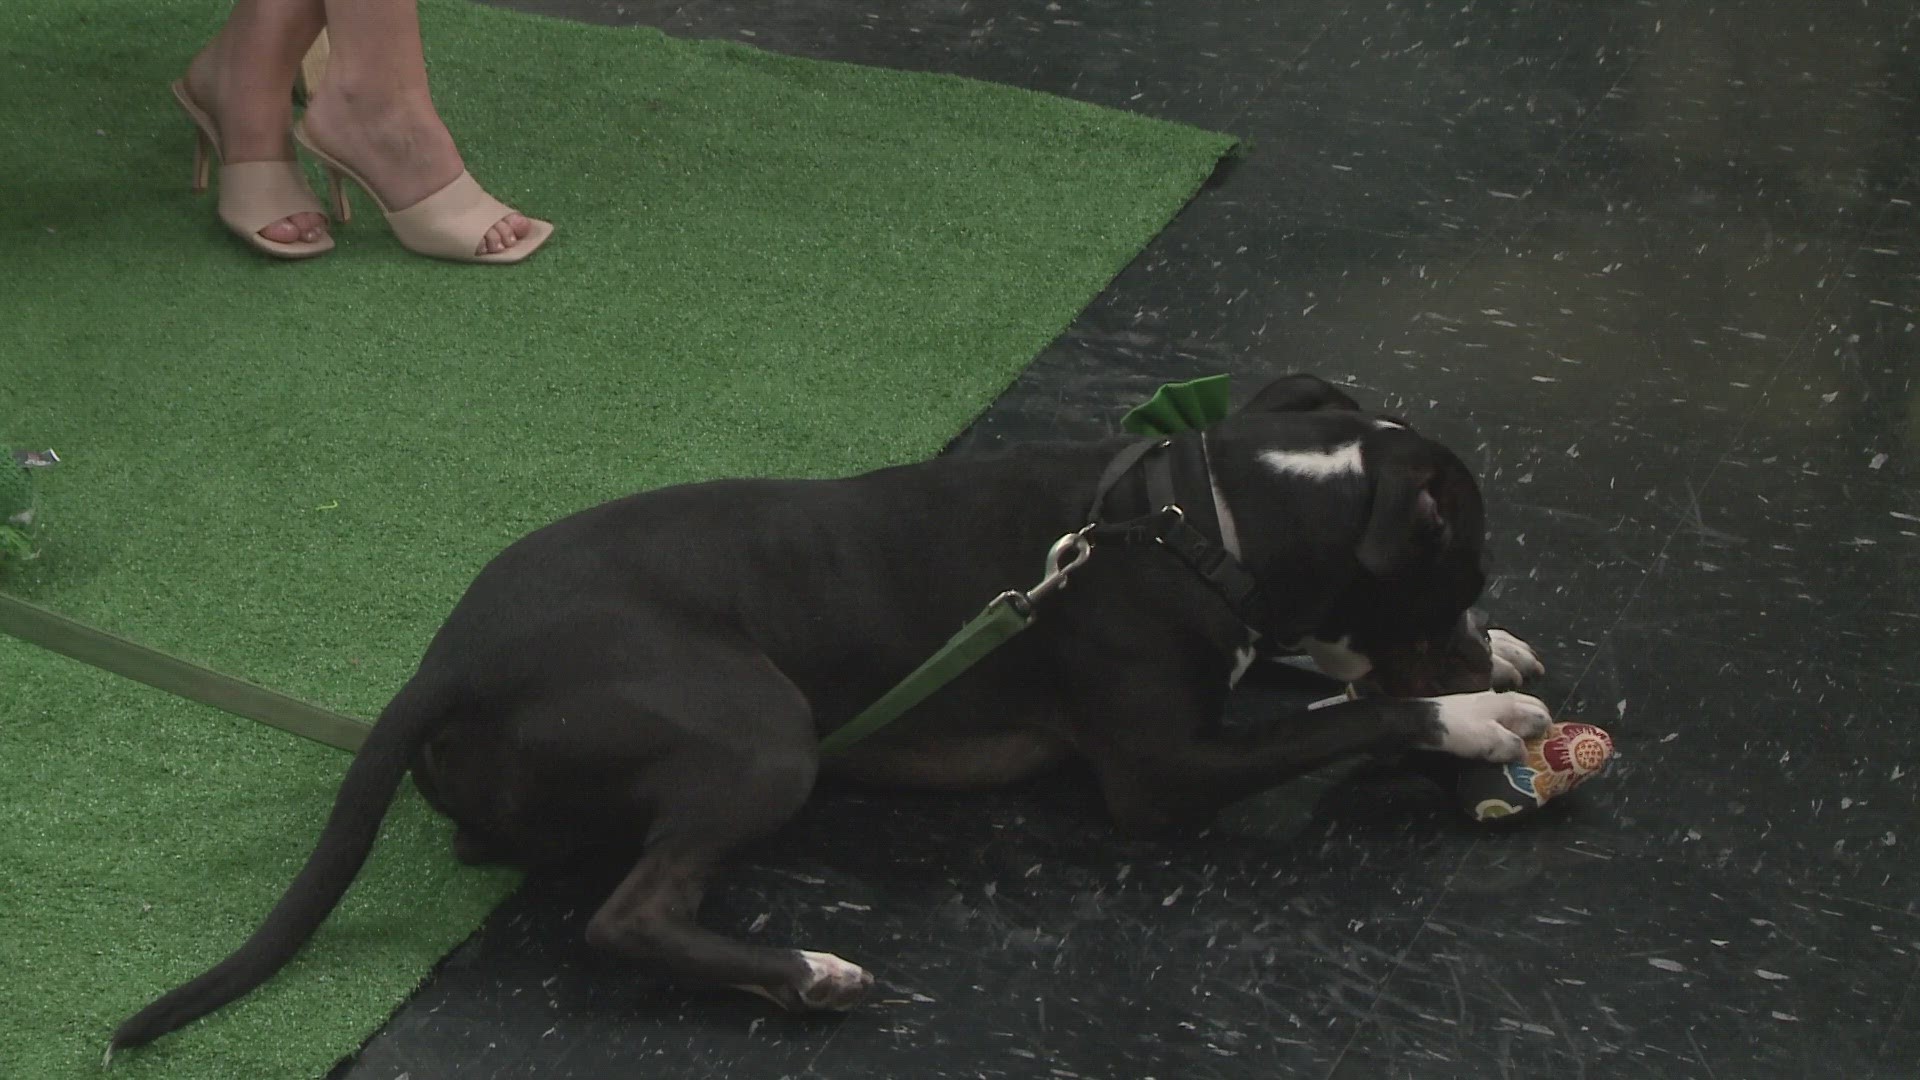 The Euclid Animal Shelter visited 3News on Saturday during the pet of the week segment. Thompson has been at the Euclid Animal Shelter the longest.